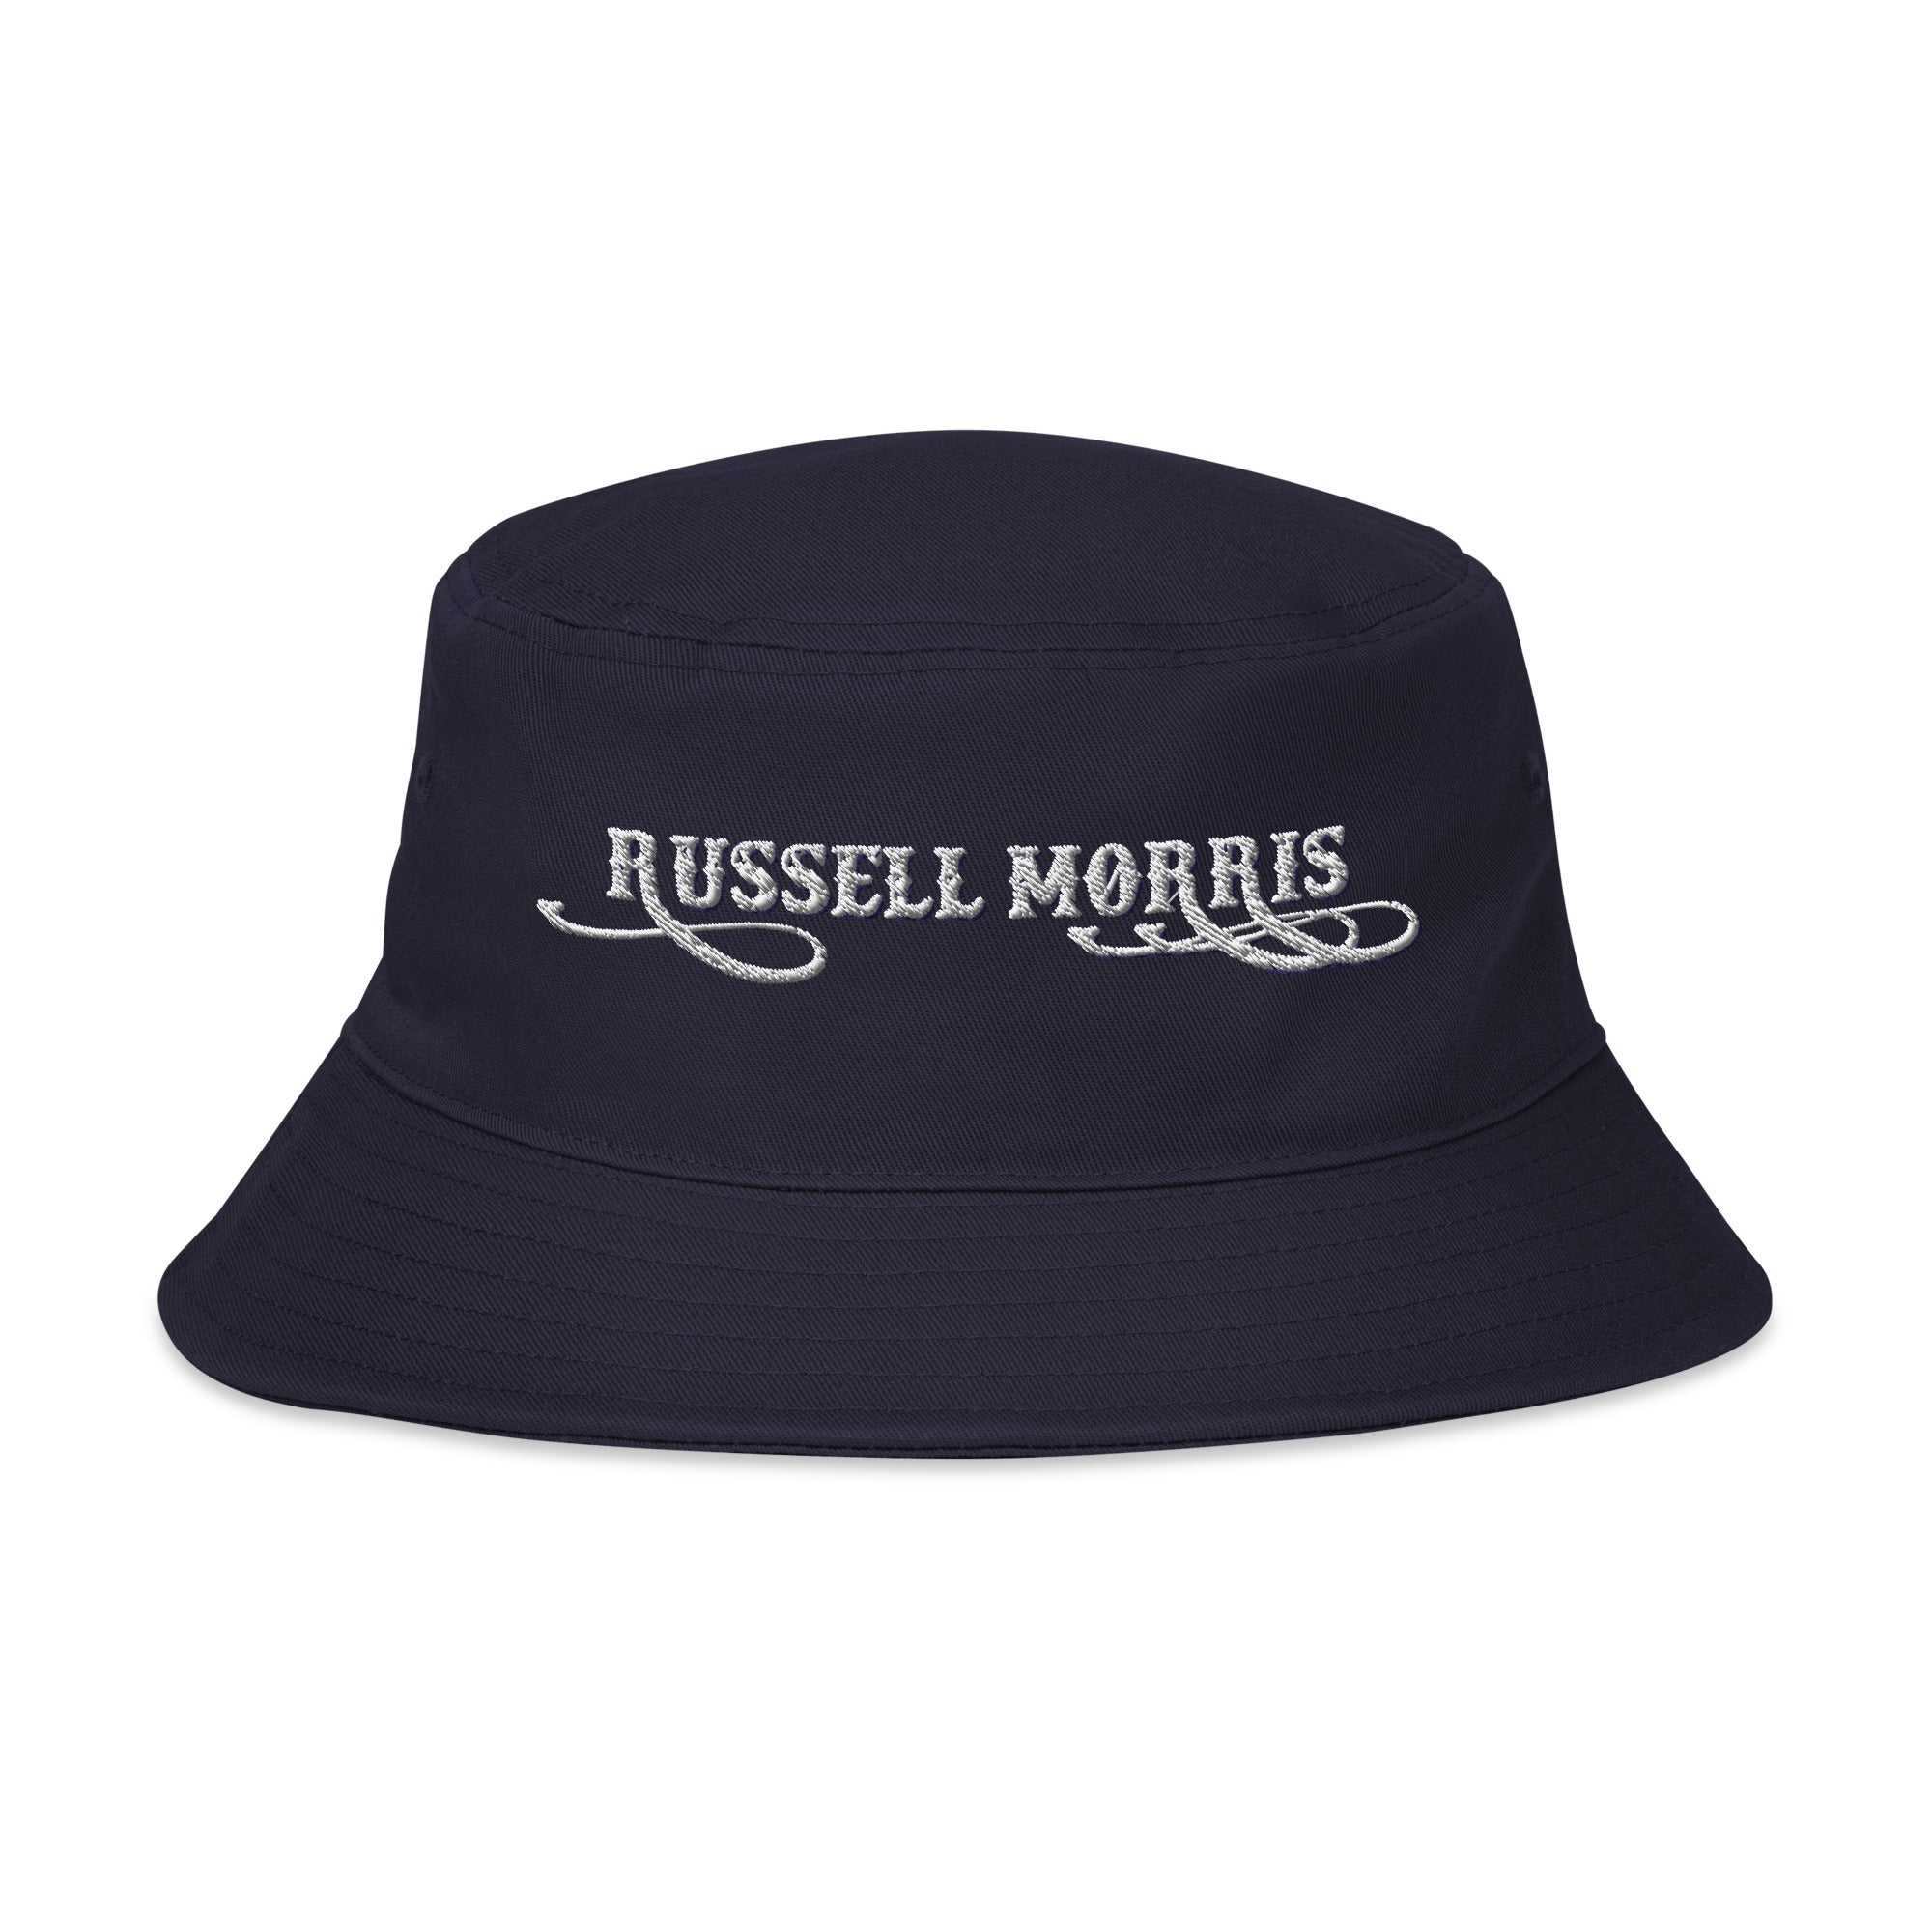 RUSSELL MORRIS - GONE FISHING HAT